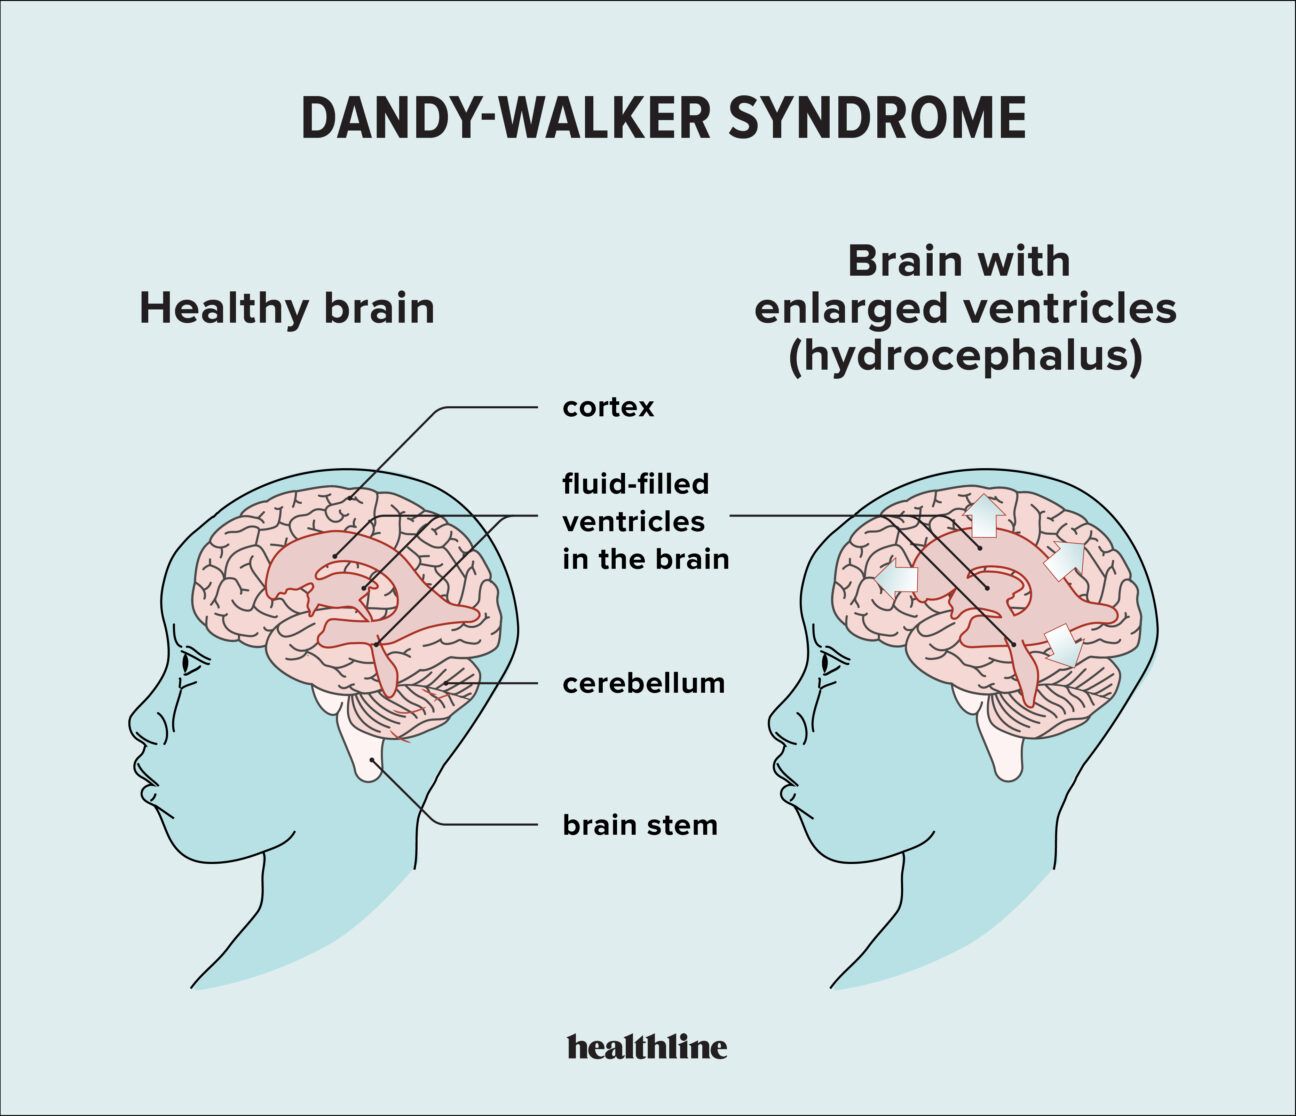 Illustration showing healthy brain vs. brain with enlarged ventricles (Dandy-Walker syndrome)